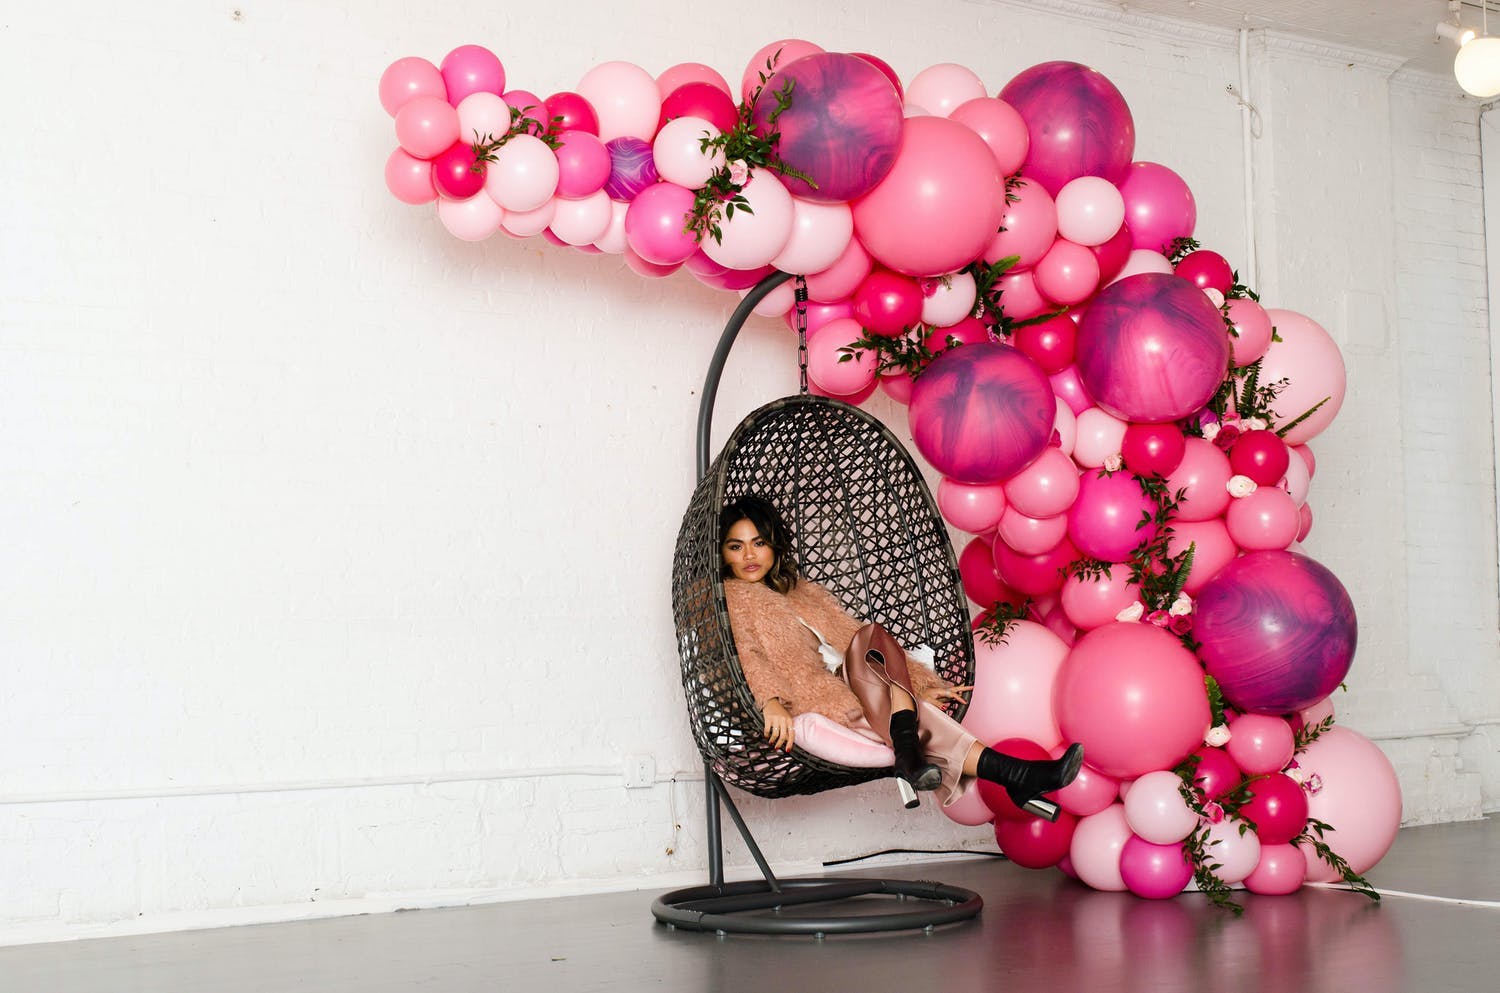 Woman sits on swing photo op with cascade of hot pink balloons | PartySlate